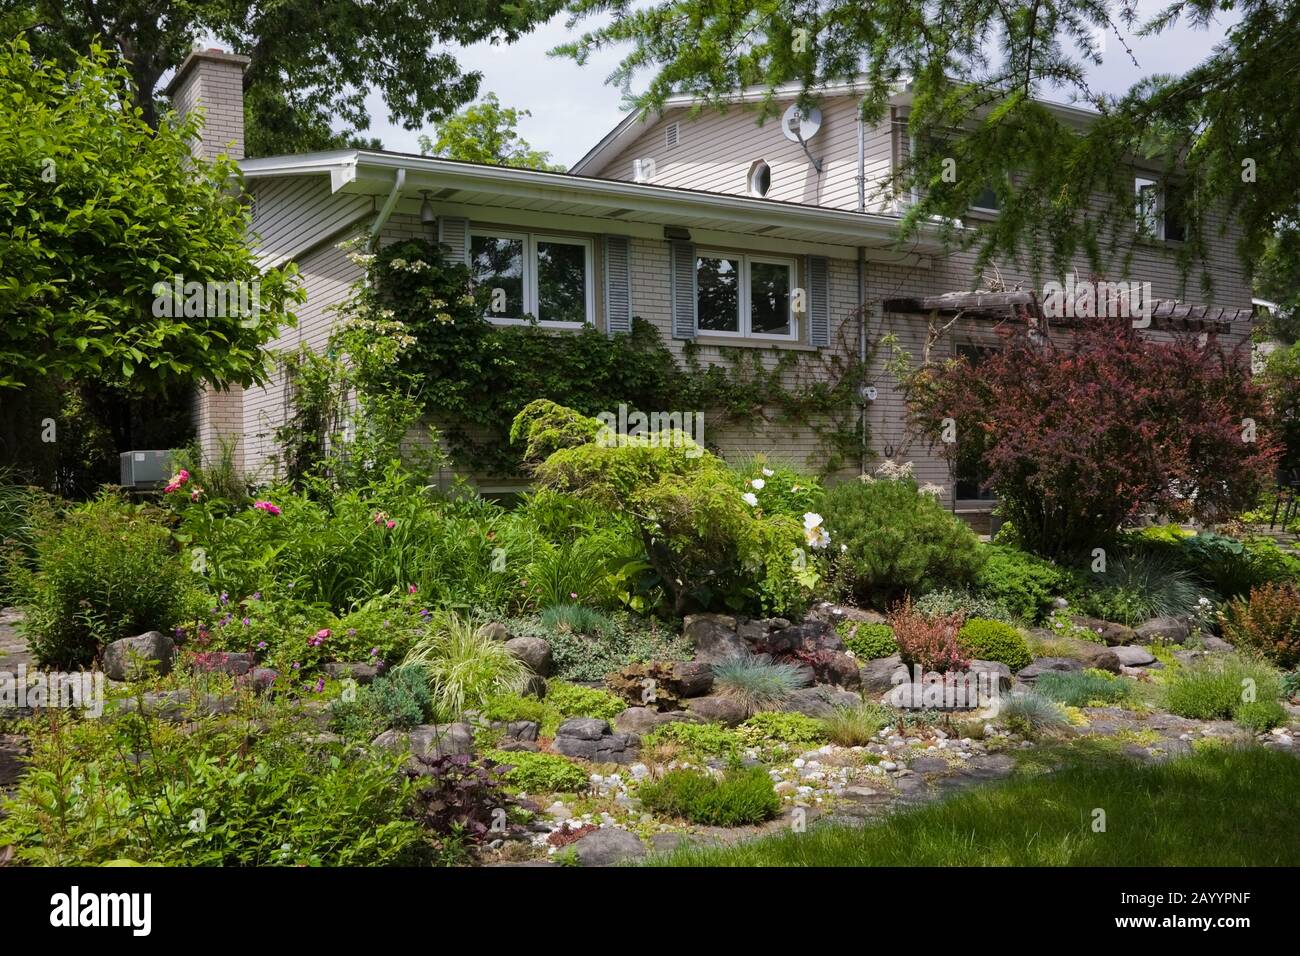 Back of house and rock edged border with various plants, shrubs, trees including purple Paeonia - Peony flowers, Festuca glauca 'Elijah Blue' - Fescue Stock Photo